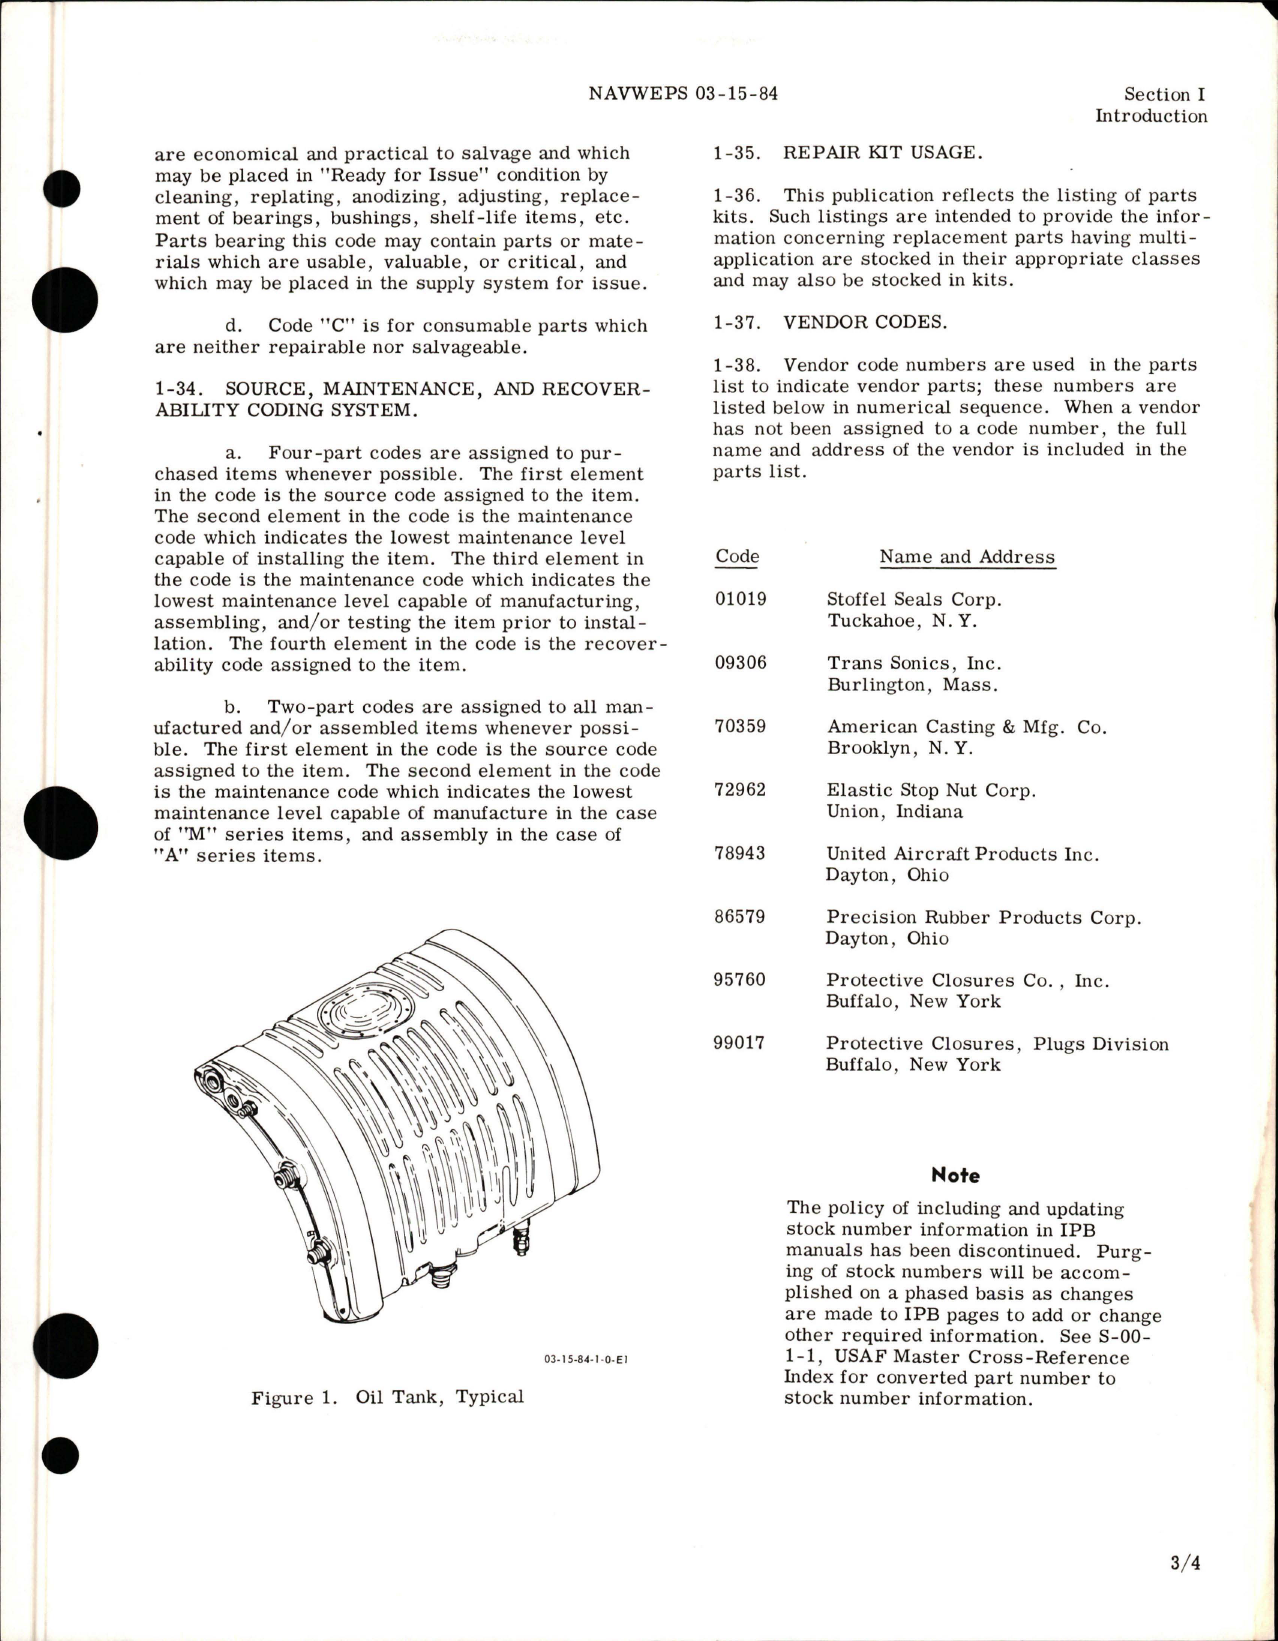 Sample page 7 from AirCorps Library document: Illustrated Parts Breakdown for Oil Tank and Sensor Assembly